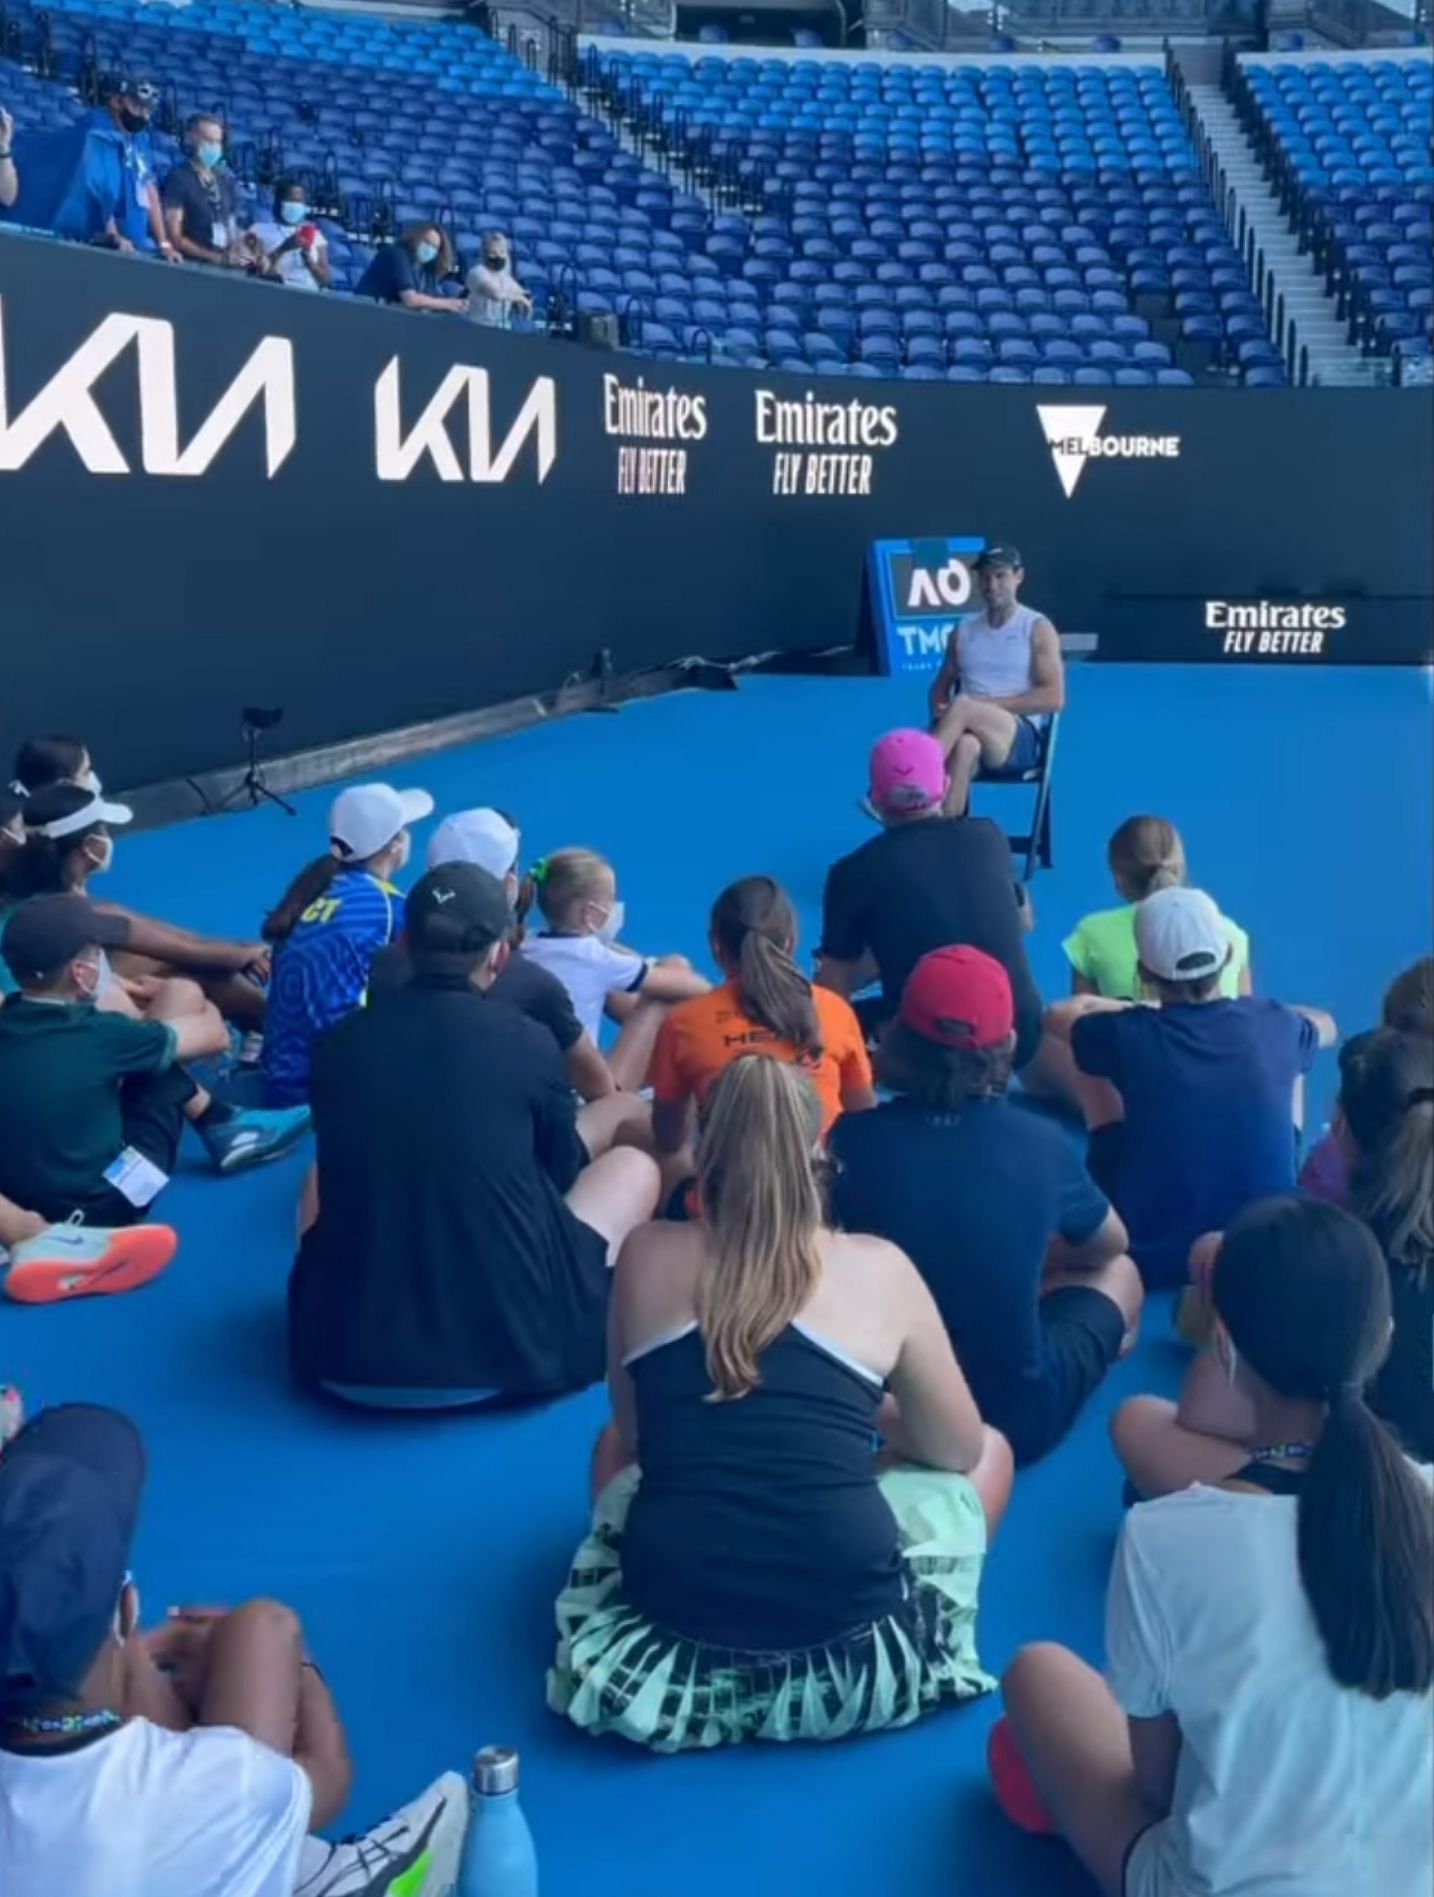 Rafael Nadal can be seen talking to the young players at the Rod Laver Arena in Melbourne